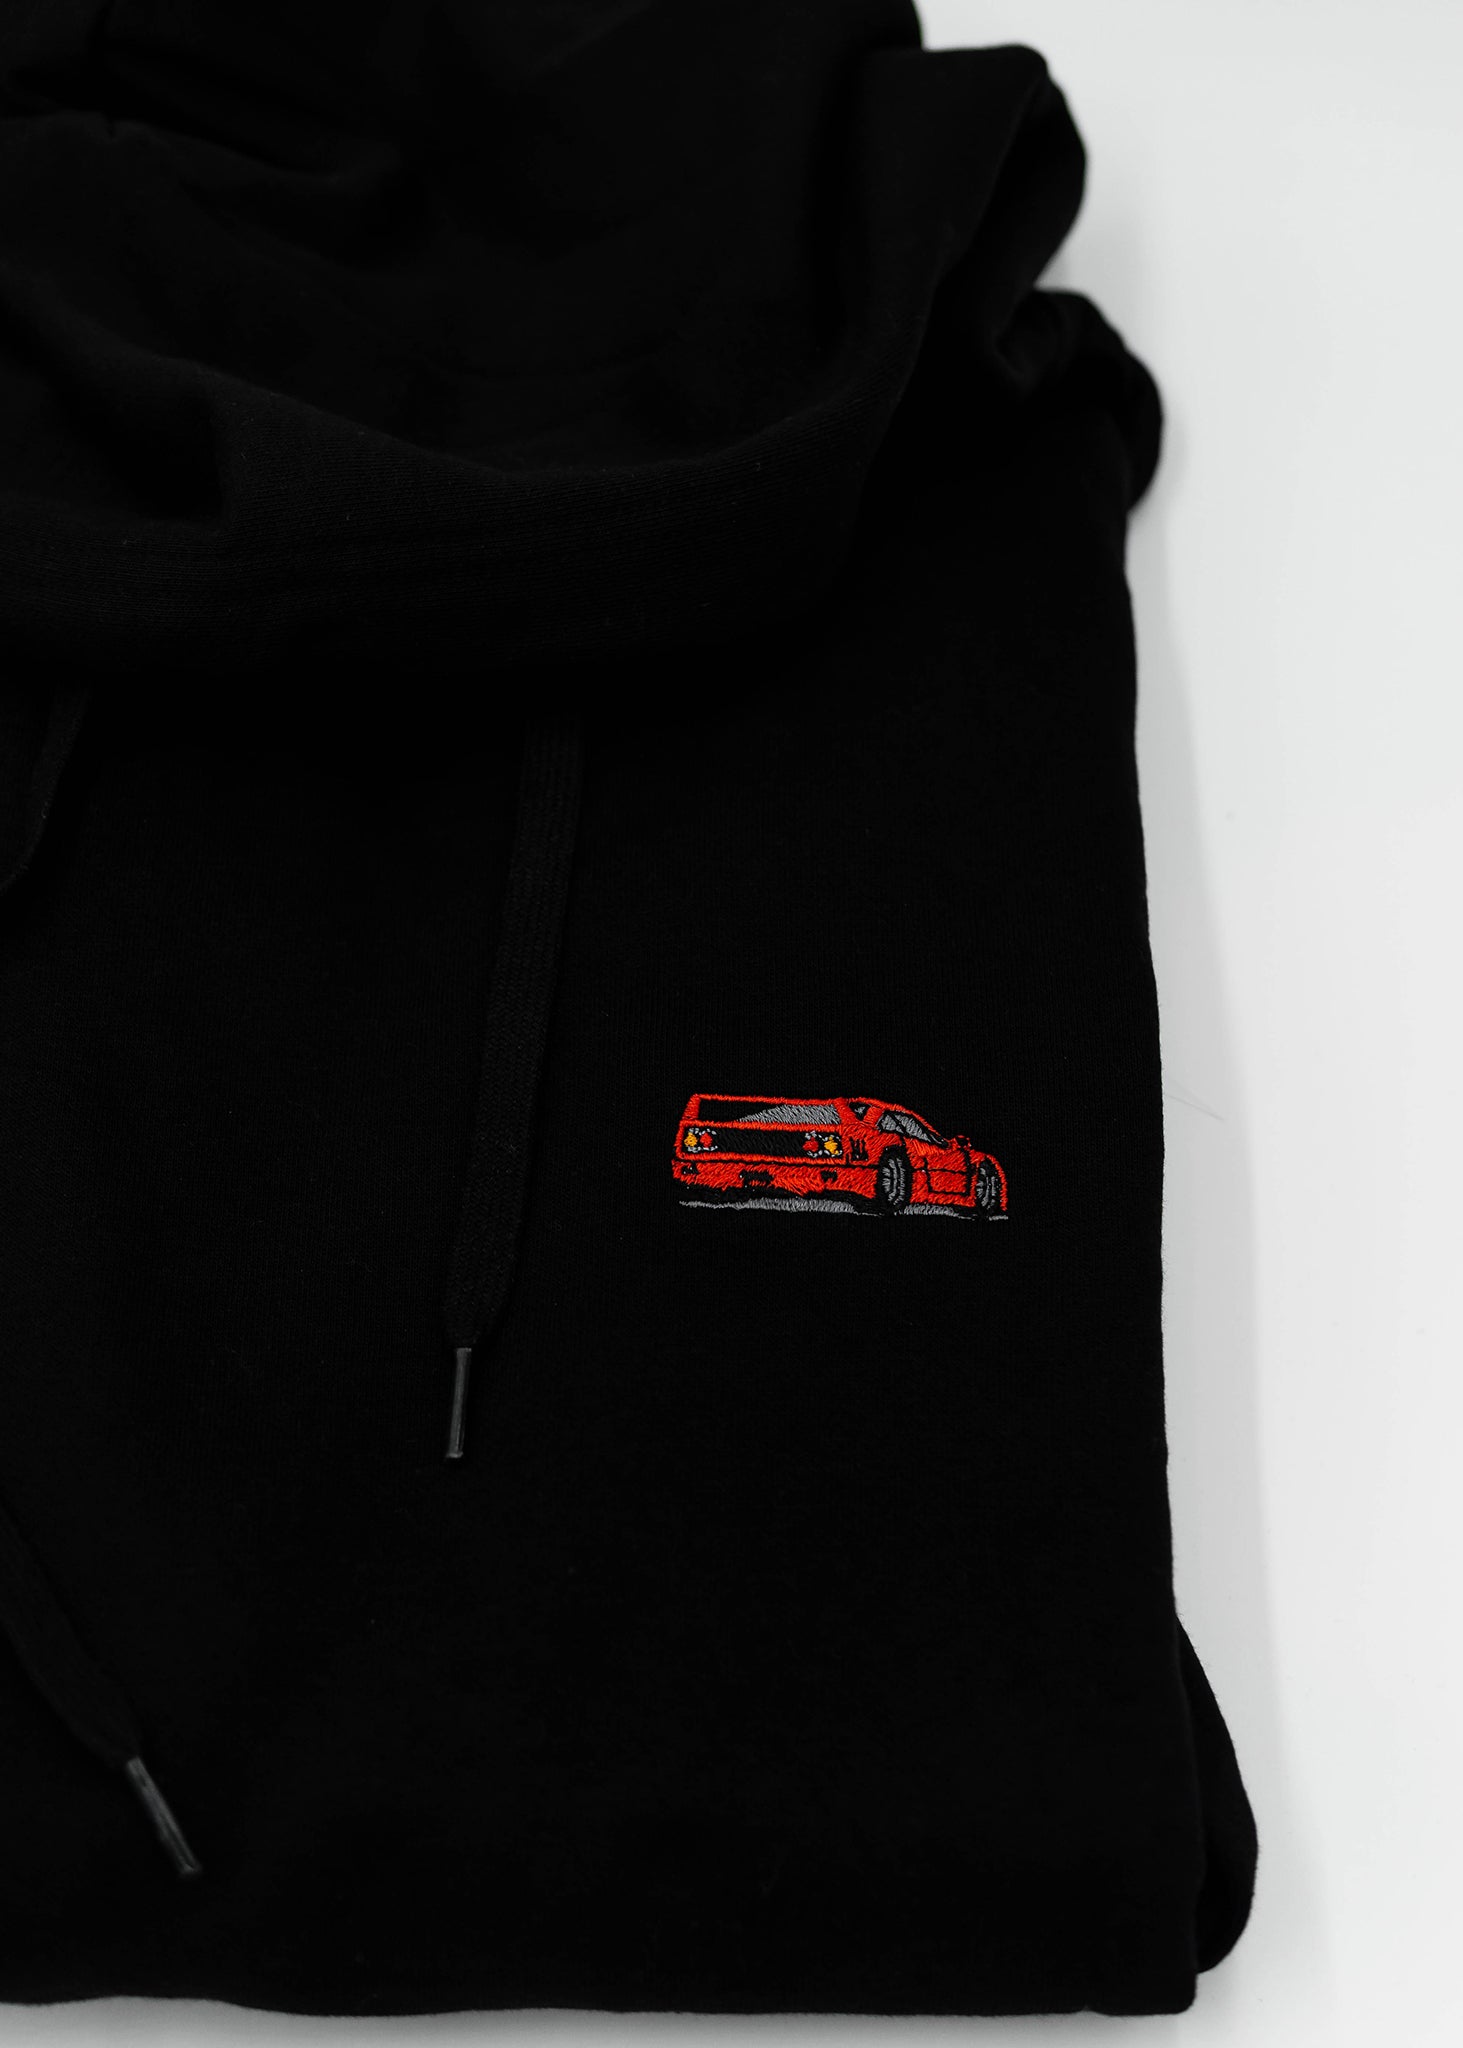 Close up of an embroidered F40 on a black unisex hoodie for men and women. Photo shows the high quality detailed embroidery of a red F40. Fabric composition of the sweater is cotton, polyester, and rayon. The material is very soft, stretchy, and non-transparent. The style of this hoodie is long sleeve, crewneck with a hood, hooded, with embroidery on the left chest.